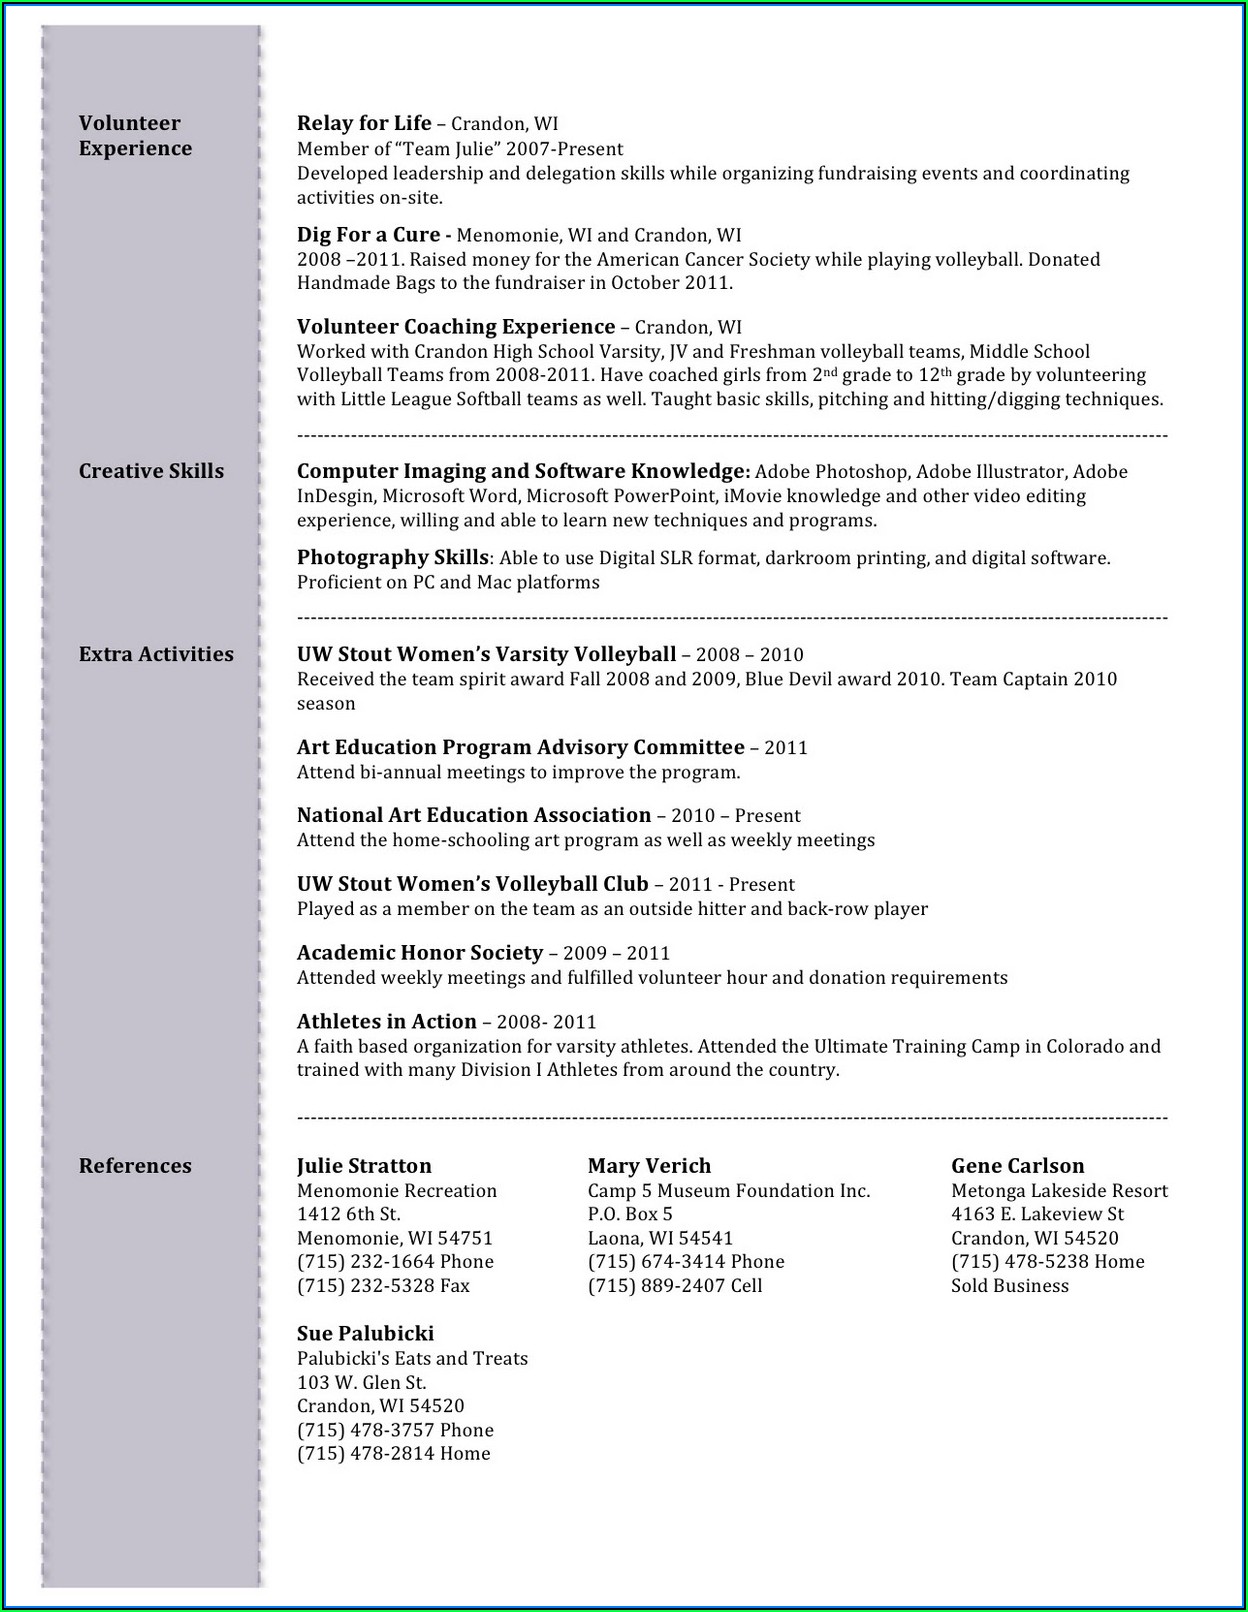 A Better Resume Service Lakeview